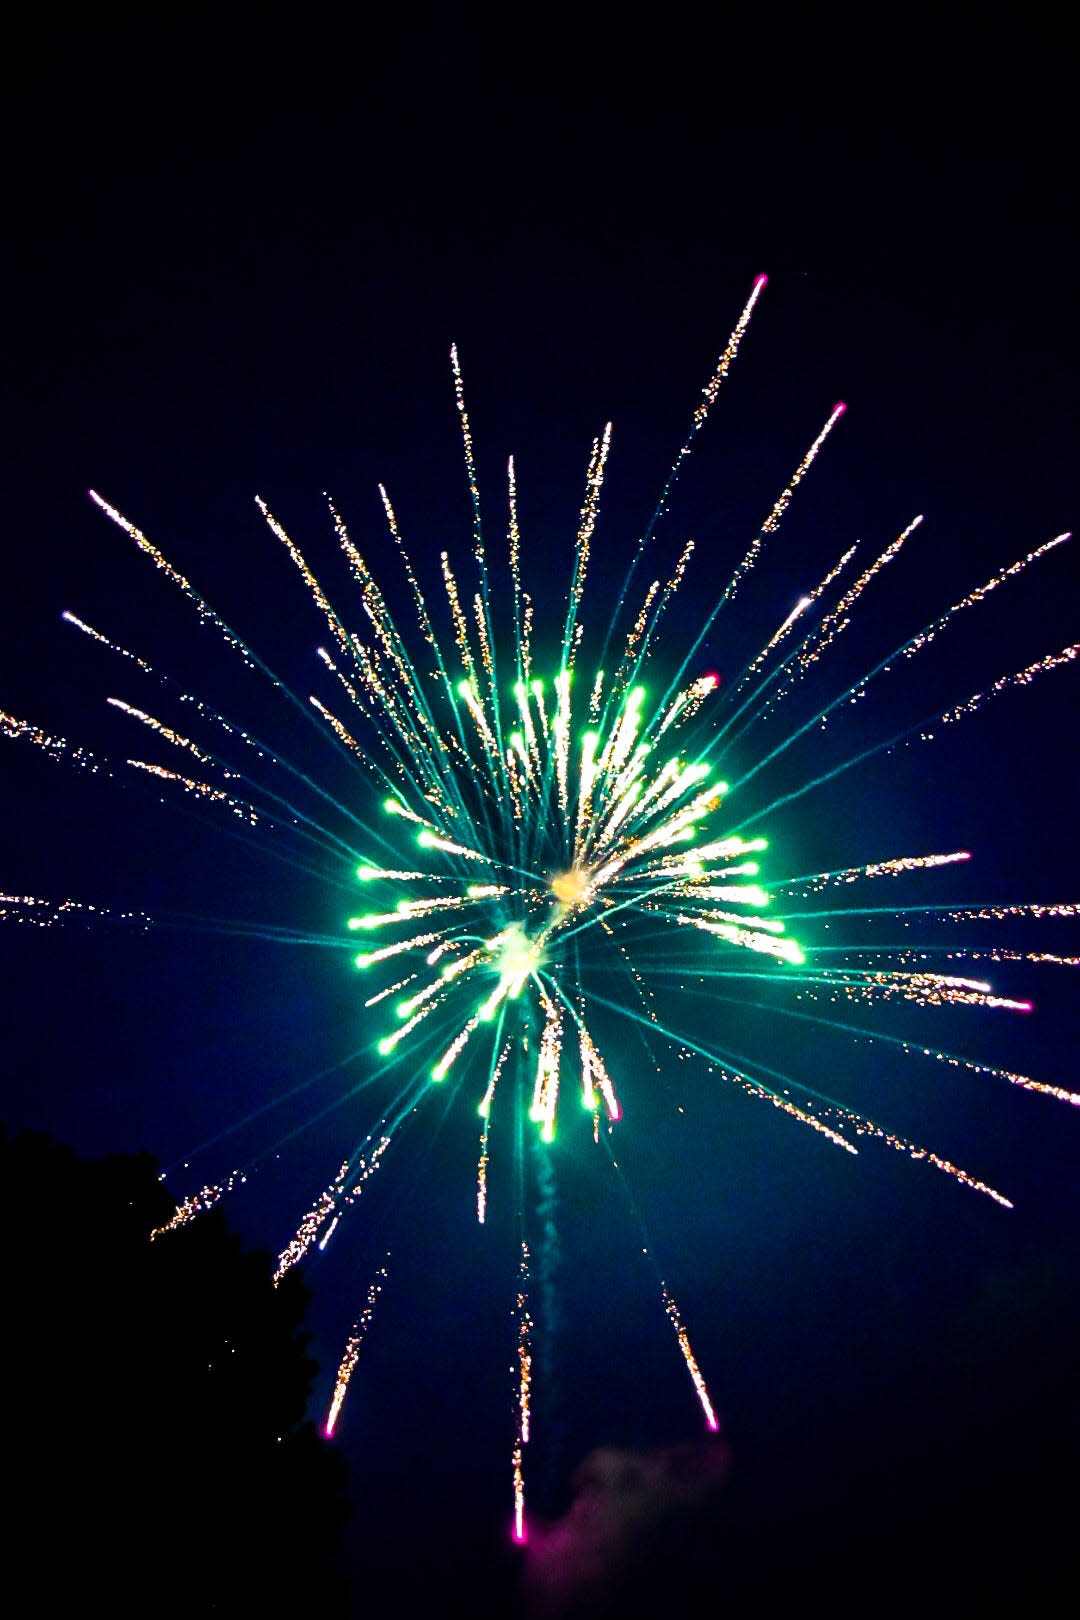 The Byesville Firemen's Festival concludes with a fireworks display over the village park.